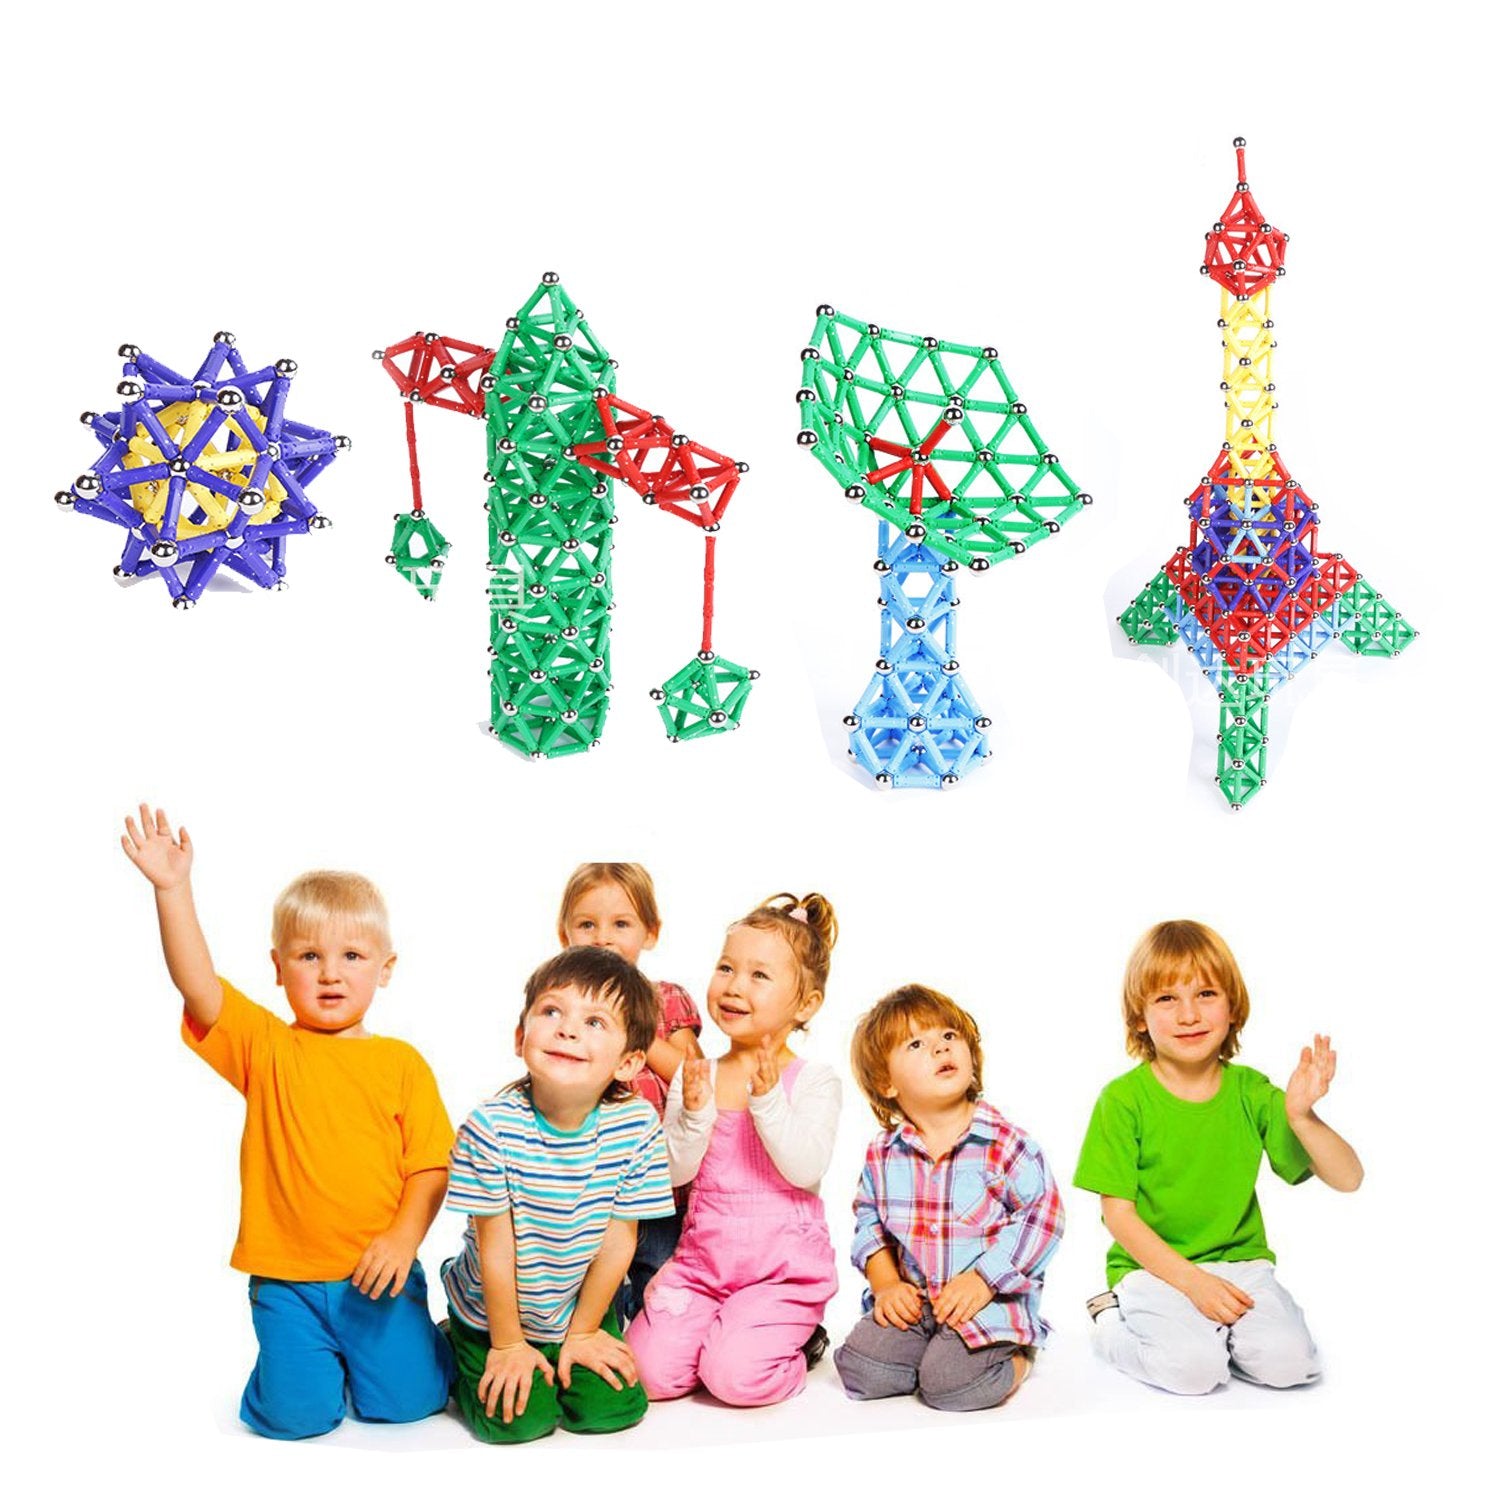 Veatree 160 Pcs Magnetic Building Sticks Blocks Toys, Magnet Educational Toys Magnetic Blocks Sticks Stacking Toys Set for Kids and Adult, Non-Toxic Building Toy 3D Puzzle with Storage Bag